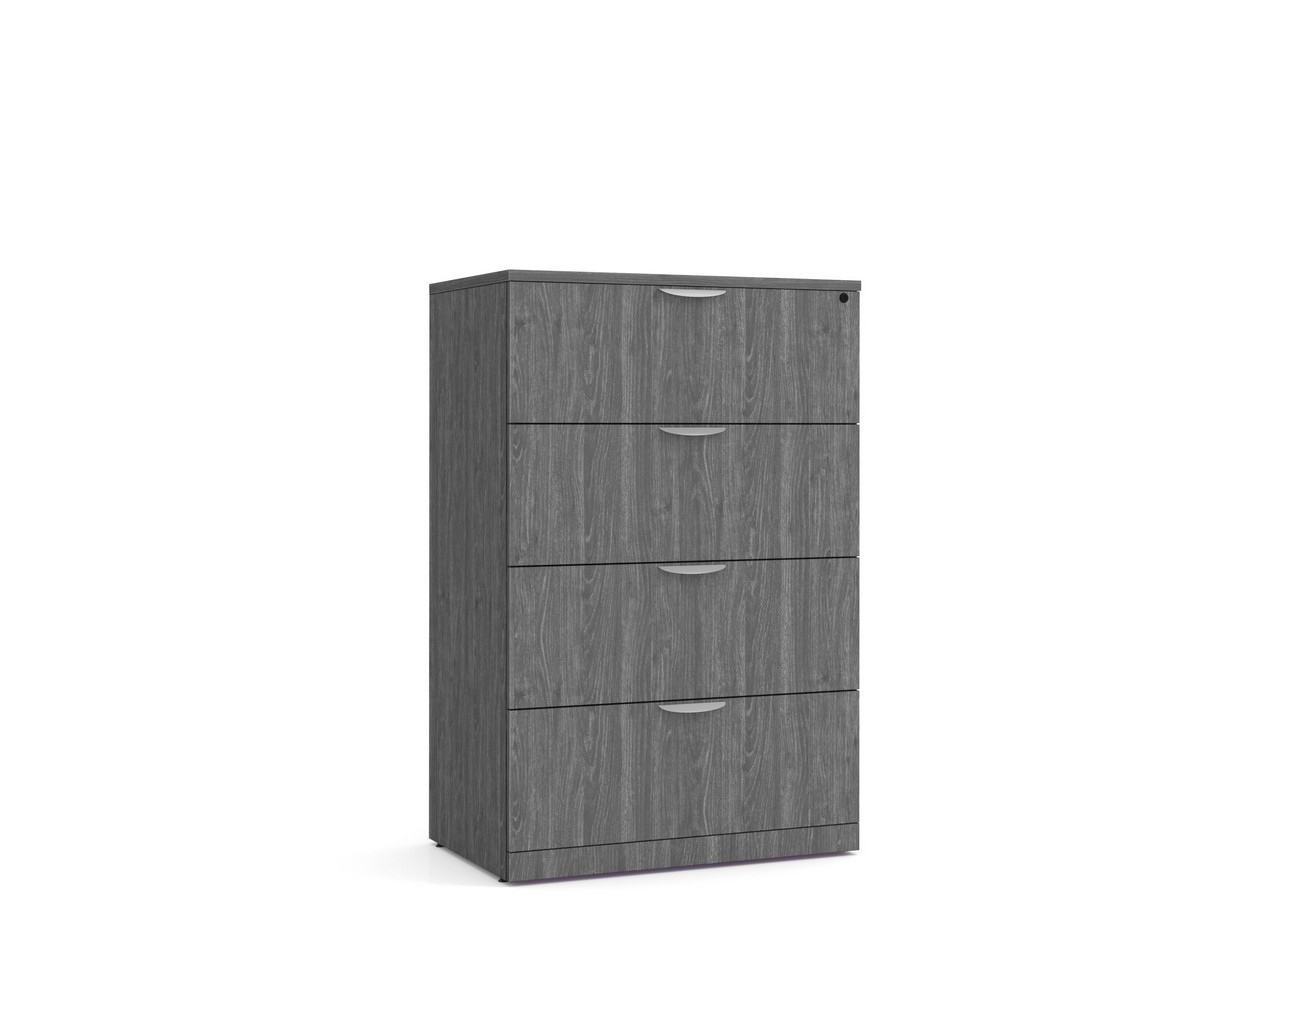 4 Drawer Lateral Filing Cabinet with Newport Grey Finish